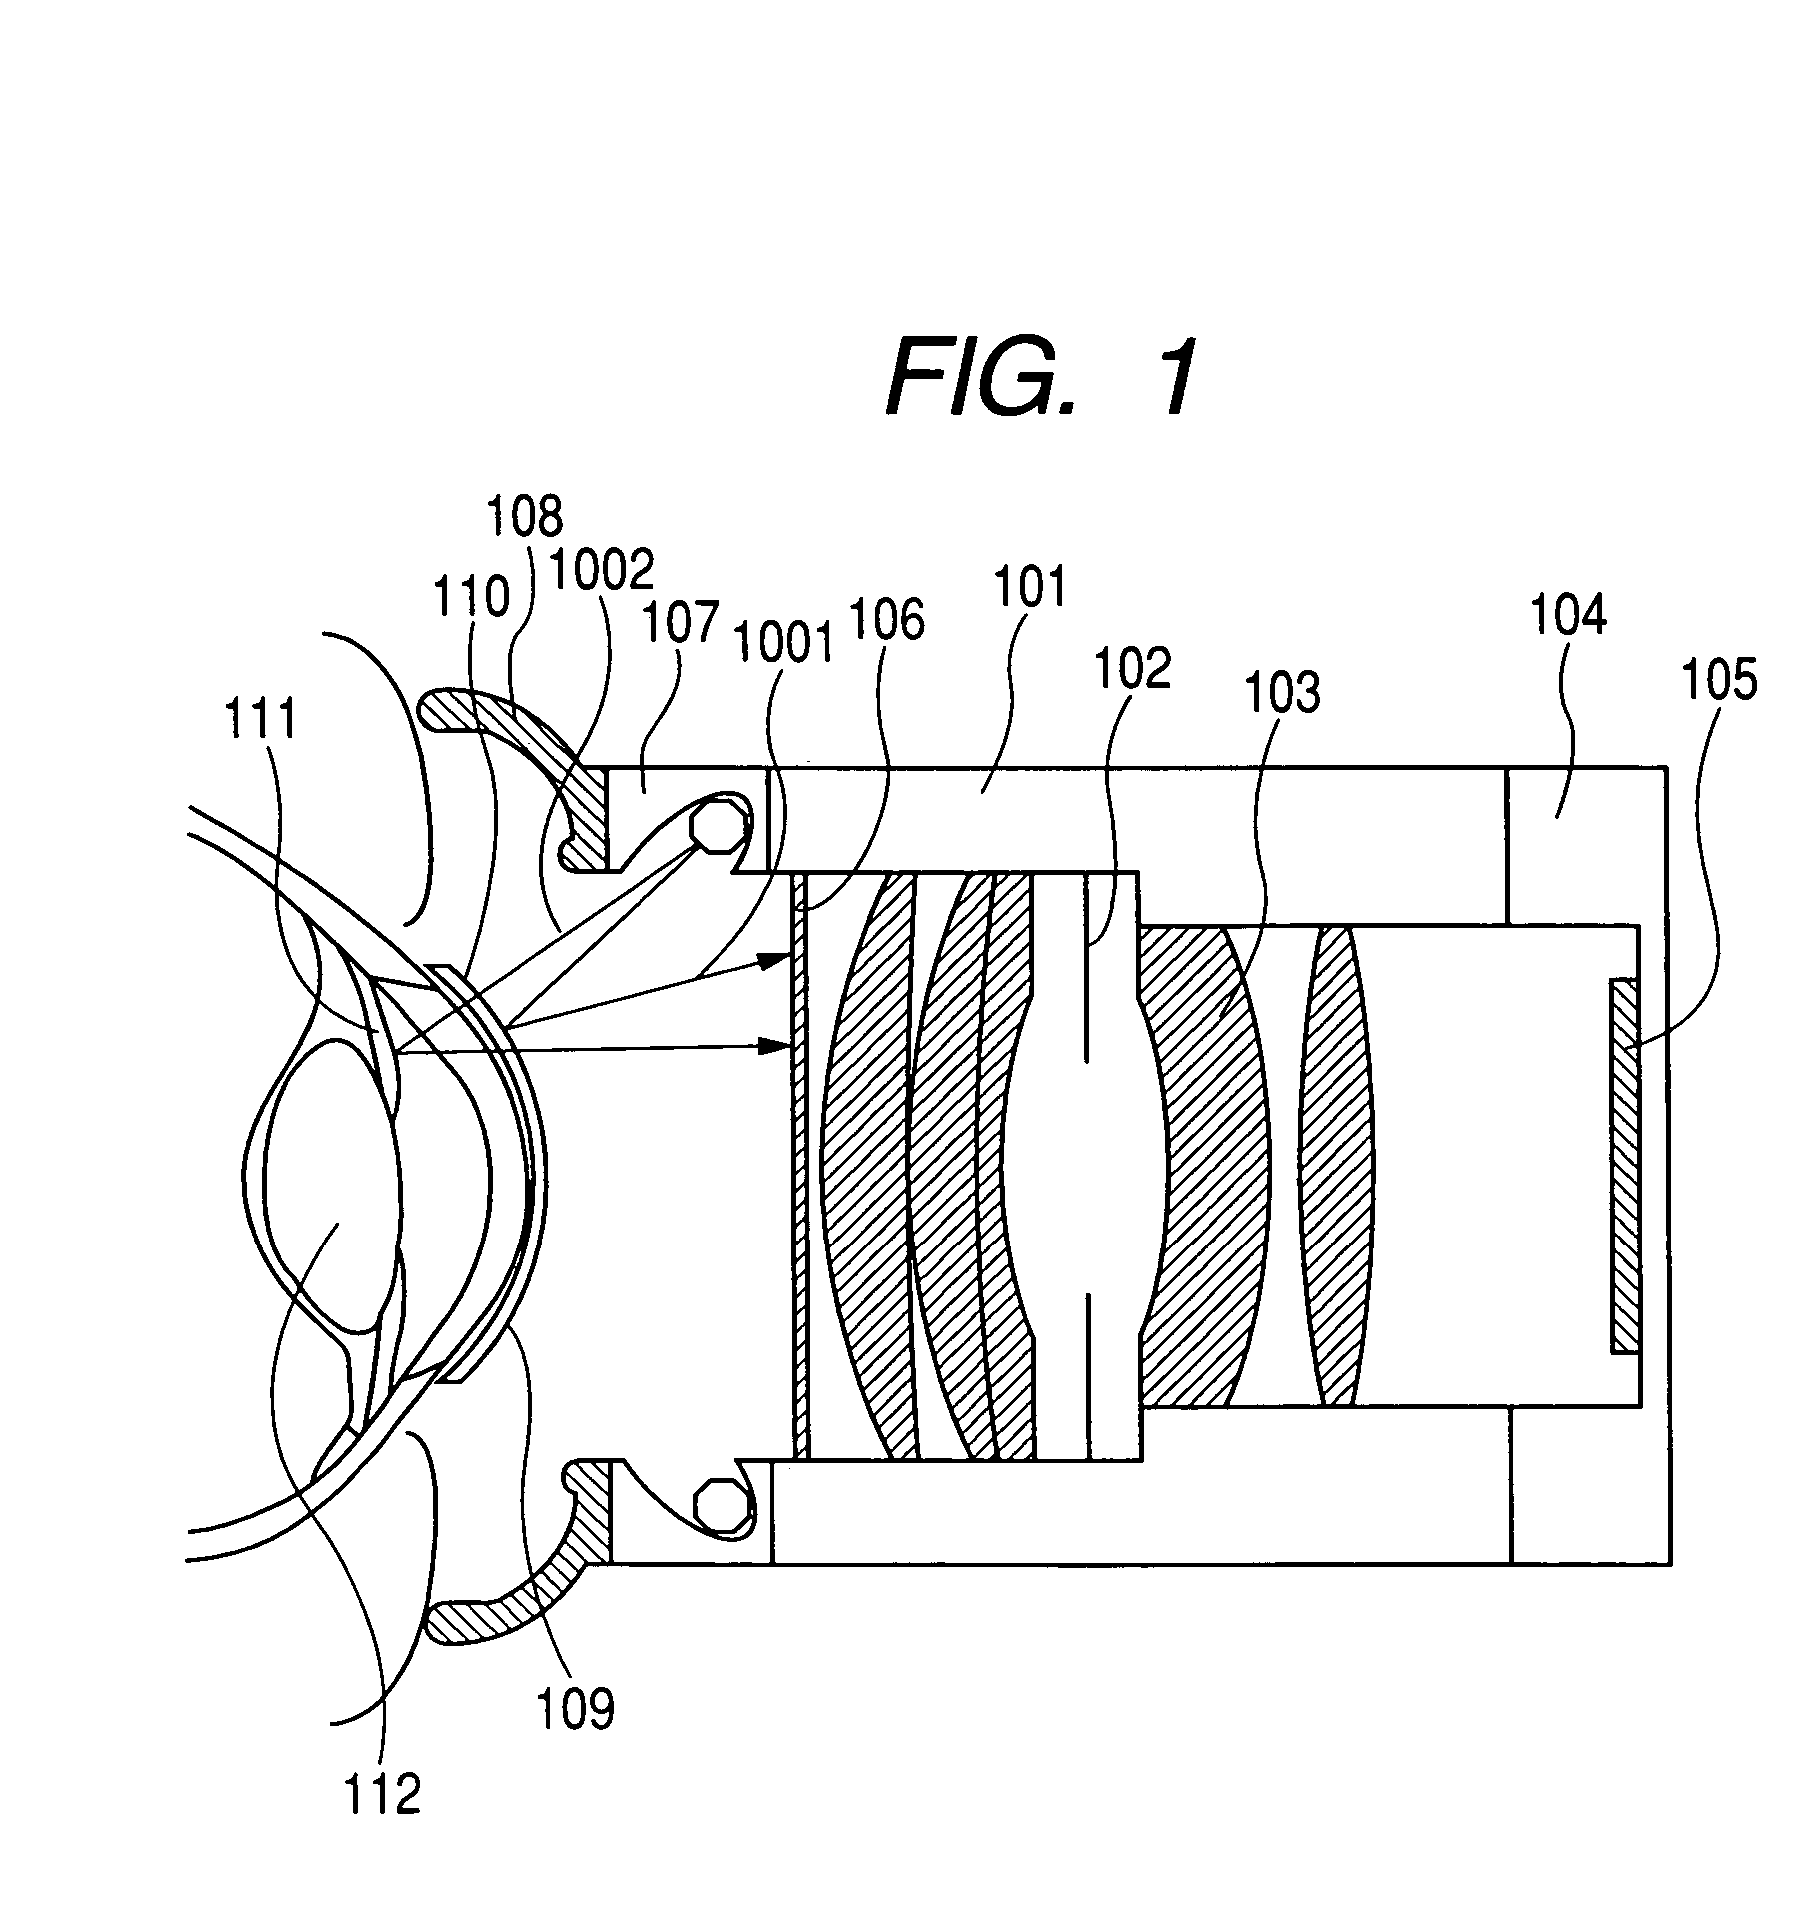 Detection apparatus for detecting an amount of an object of analysis in a fluid present in an eye or on an eye surface